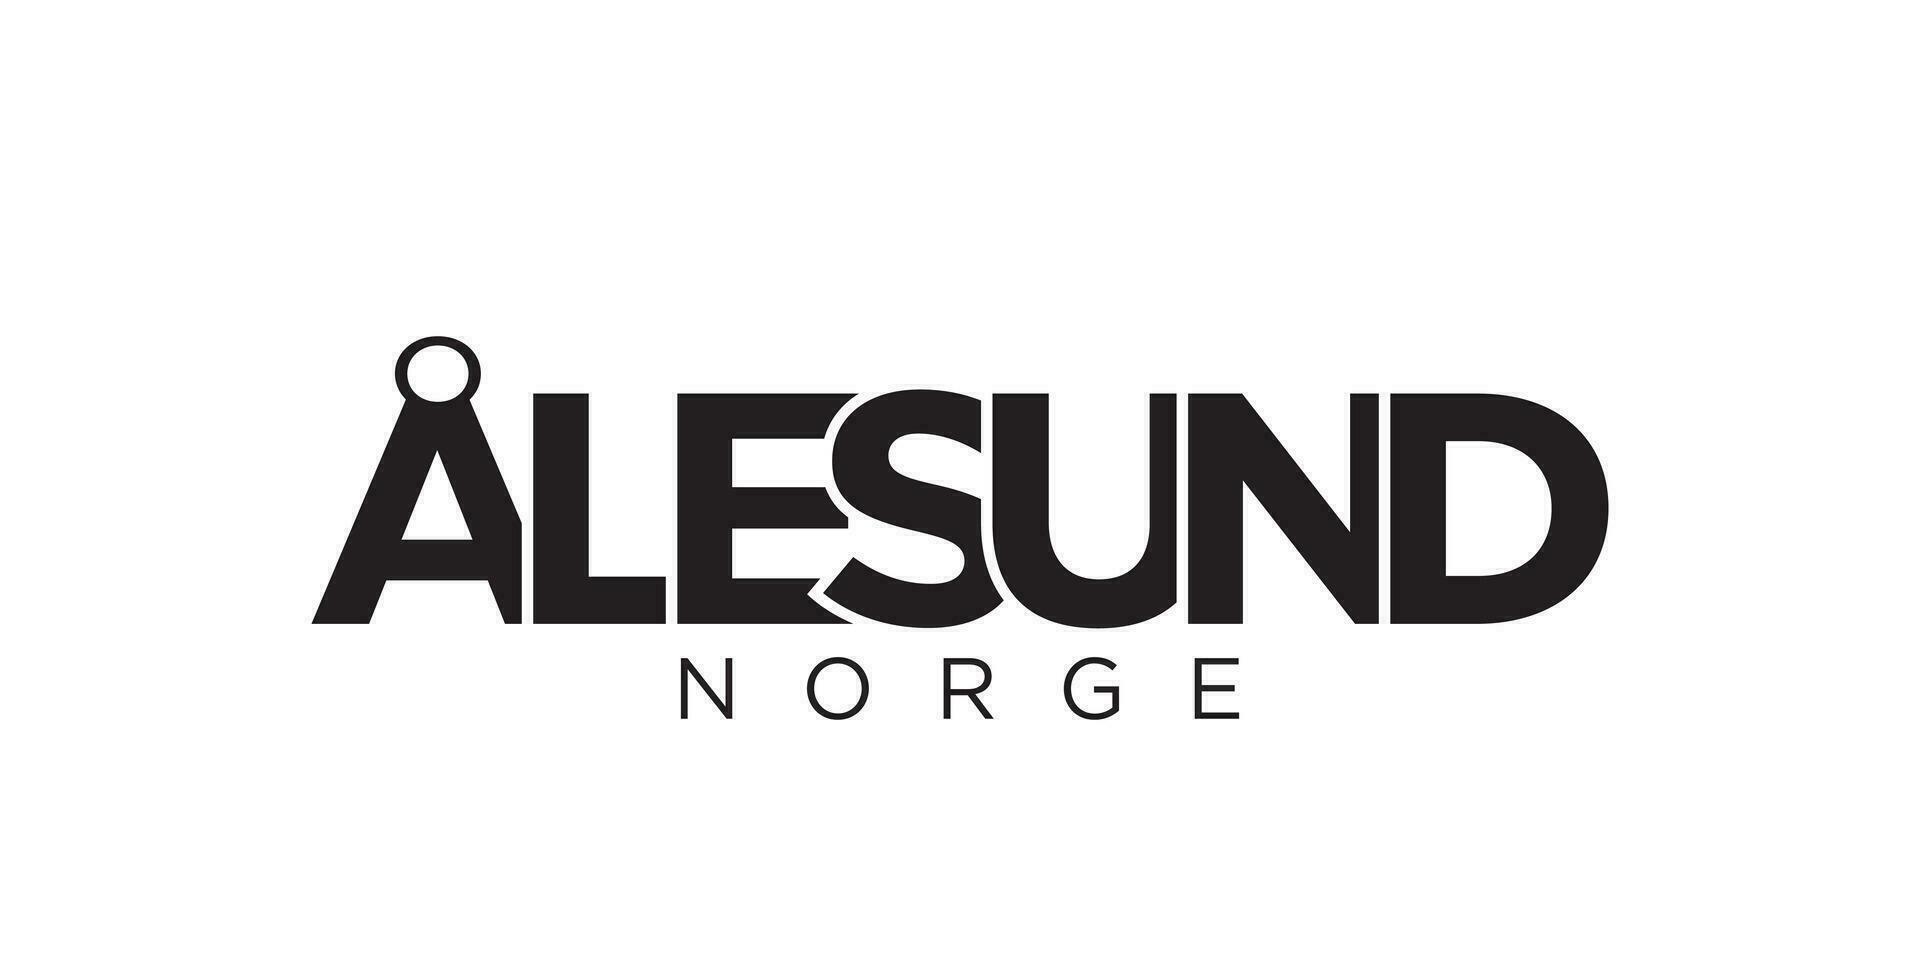 Alesund in the Norway emblem. The design features a geometric style, vector illustration with bold typography in a modern font. The graphic slogan lettering.